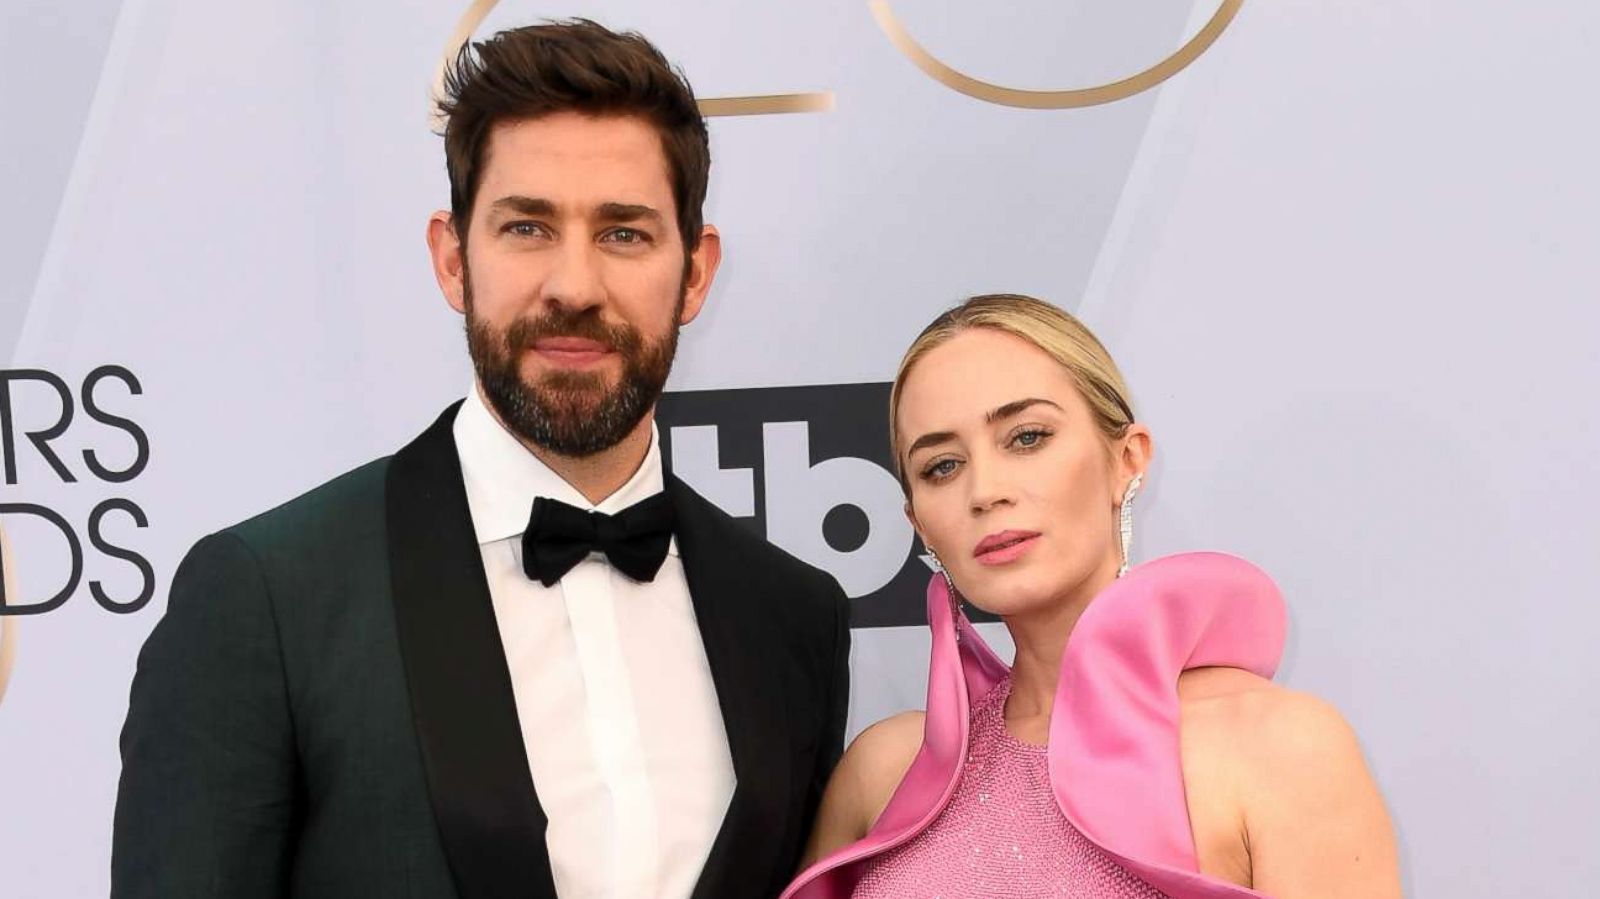 PHOTO: John Krasinski and Emily Blunt attend the 25th annual Screen Actors' Guild awards at the Shrine Auditorium, Jan. 27, 2019, in Los Angeles.